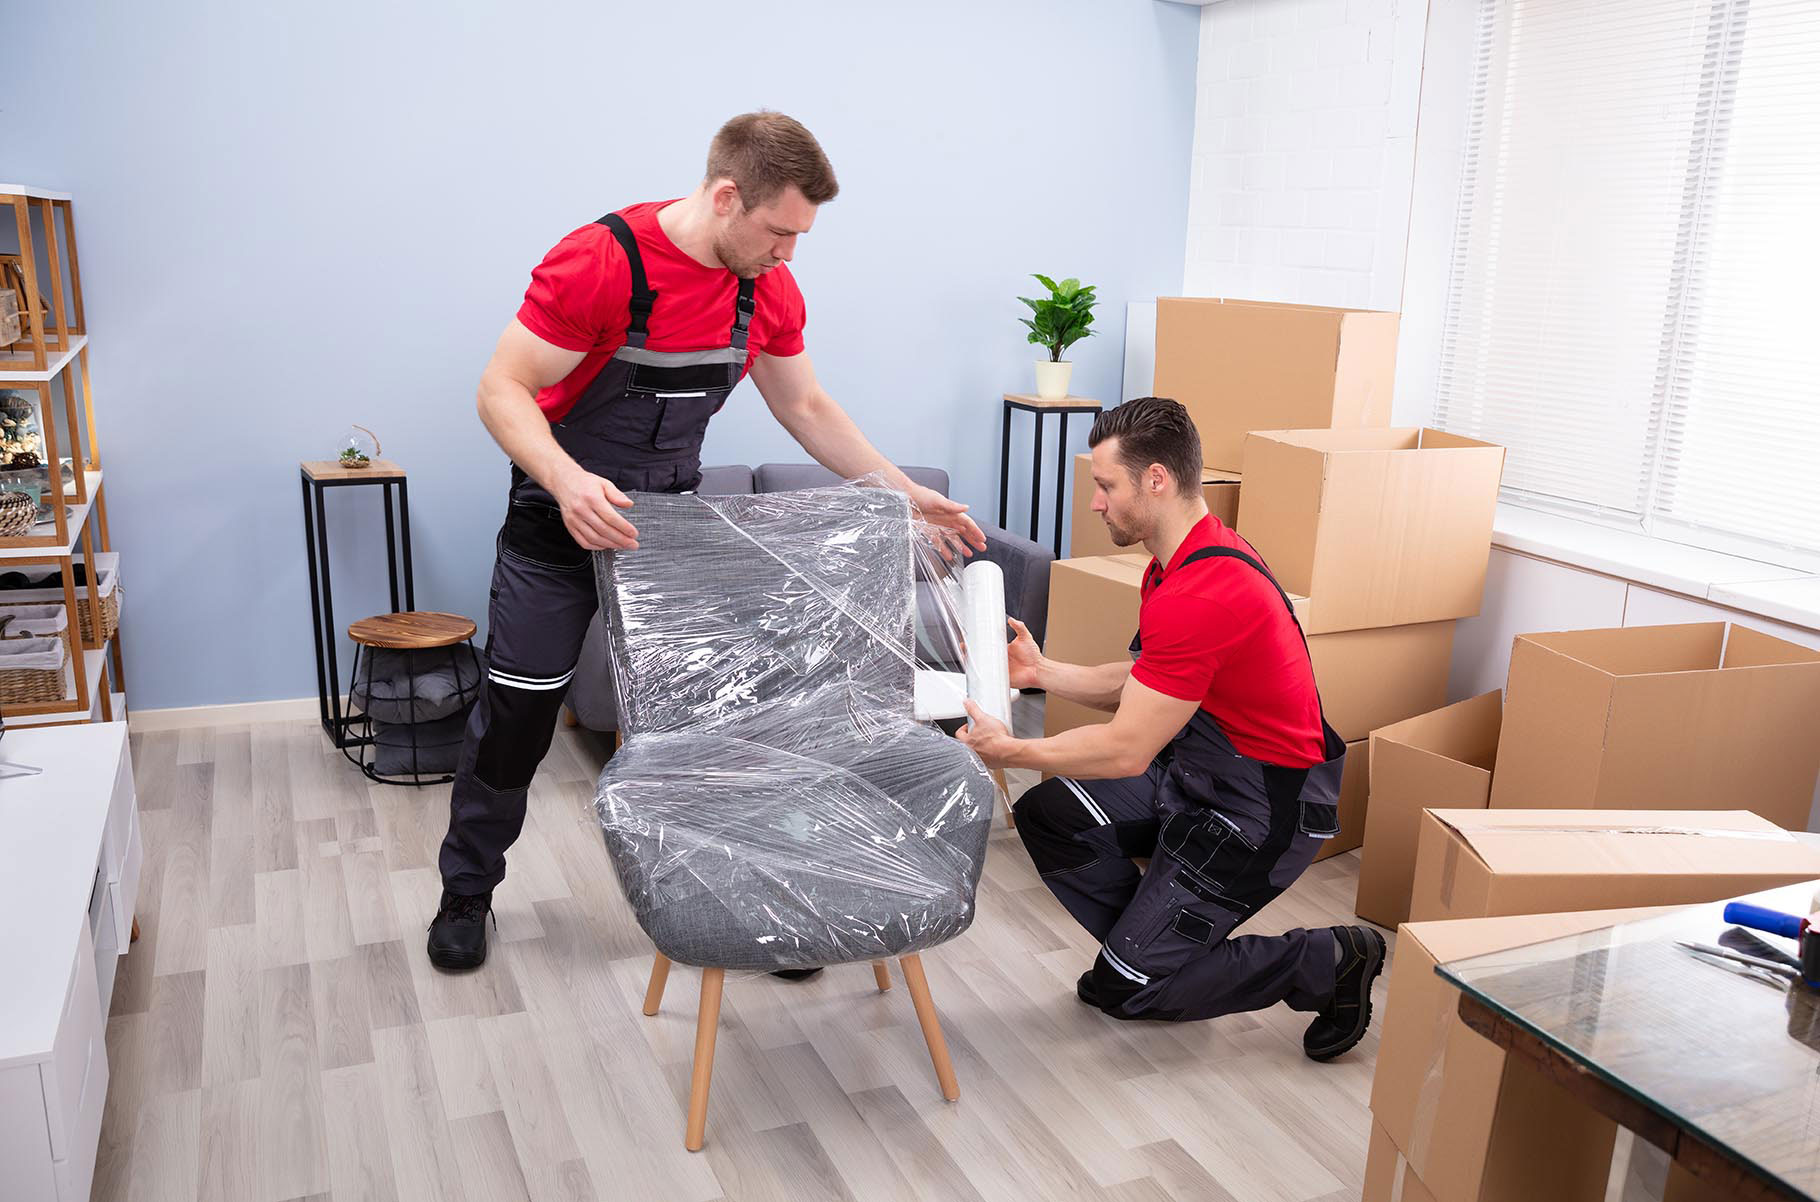 Reasons to Consider Careful Hands Movers